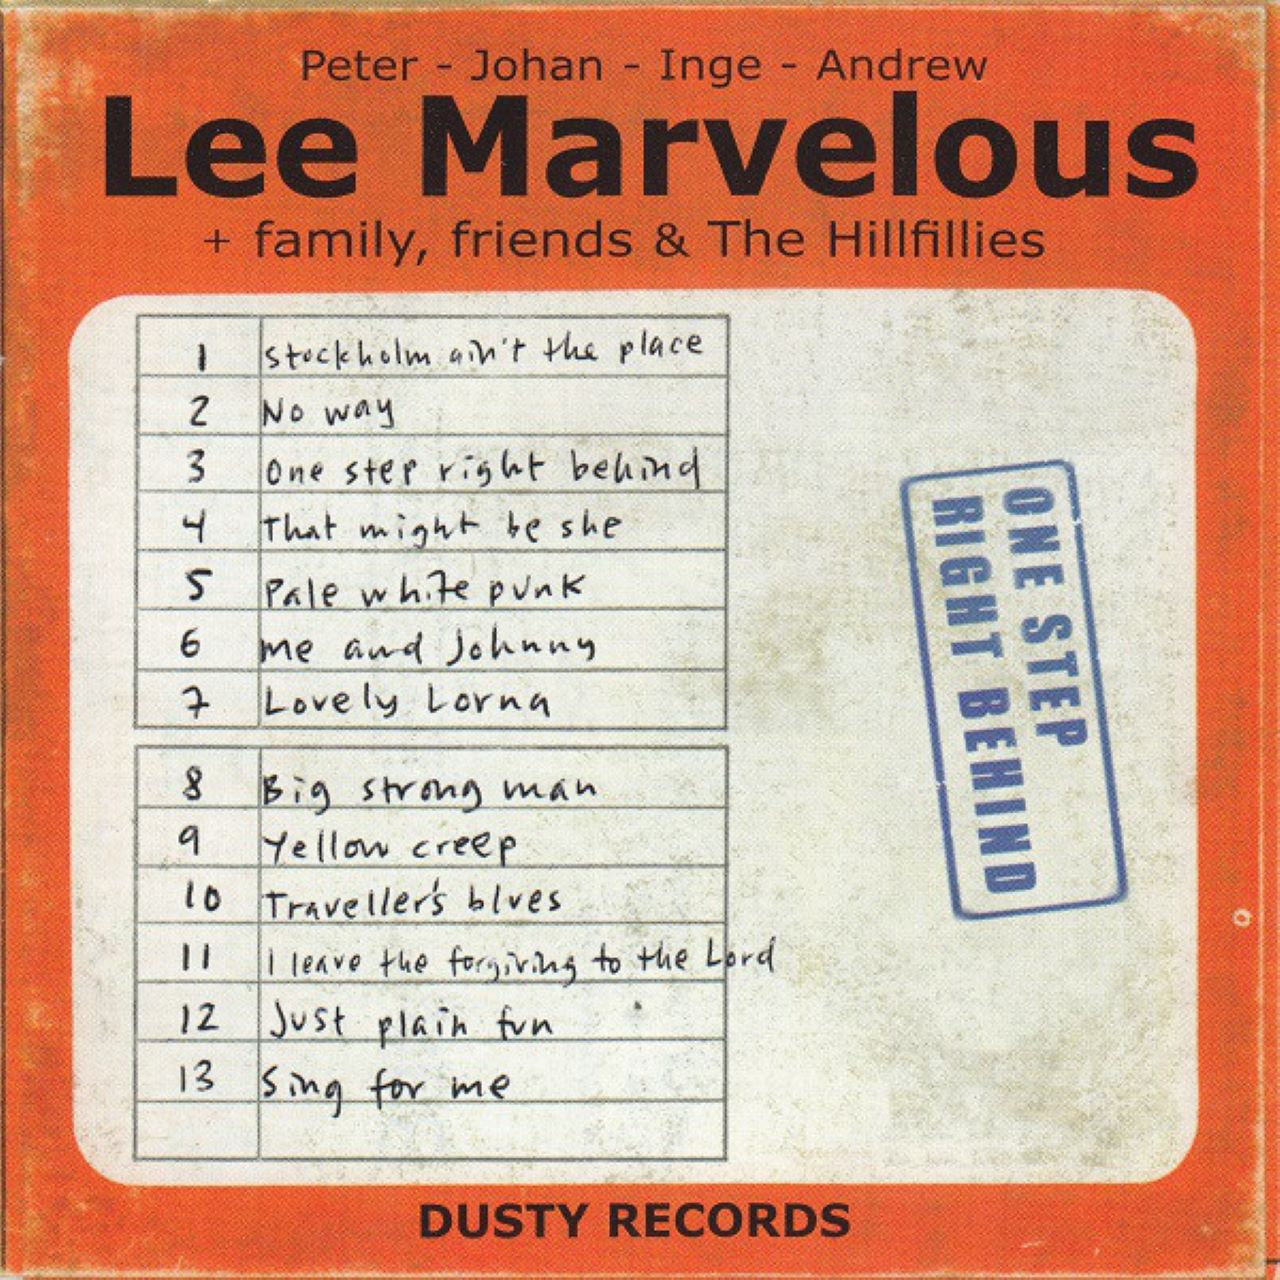 Lee Marvelous - One Step Right Behind cover album